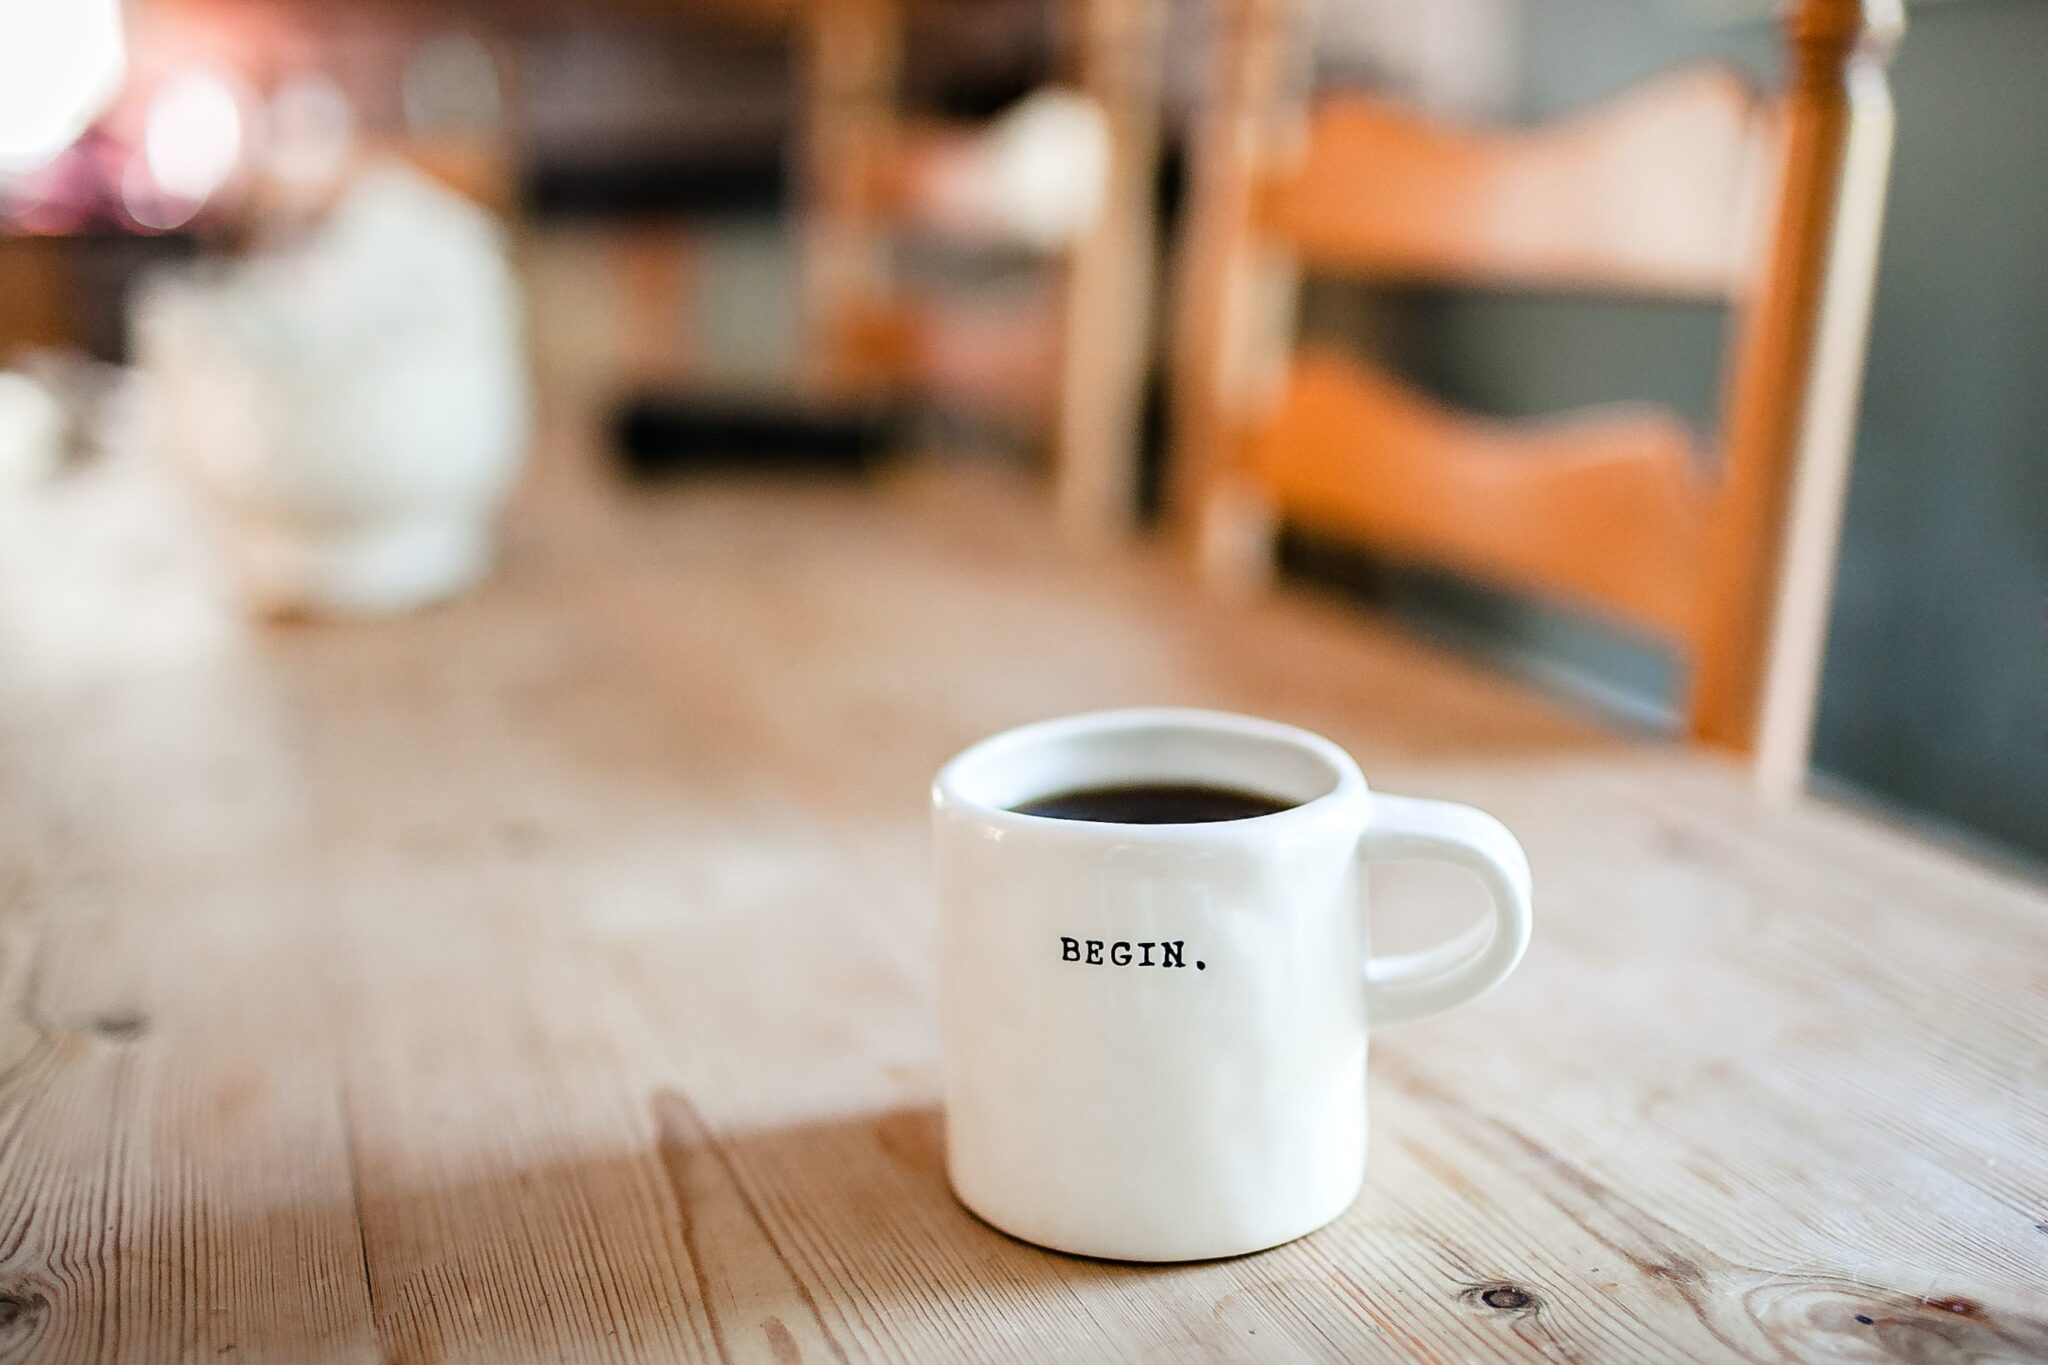 A stock image of a cup saying "begin" accompanying an article about startups in Latin America